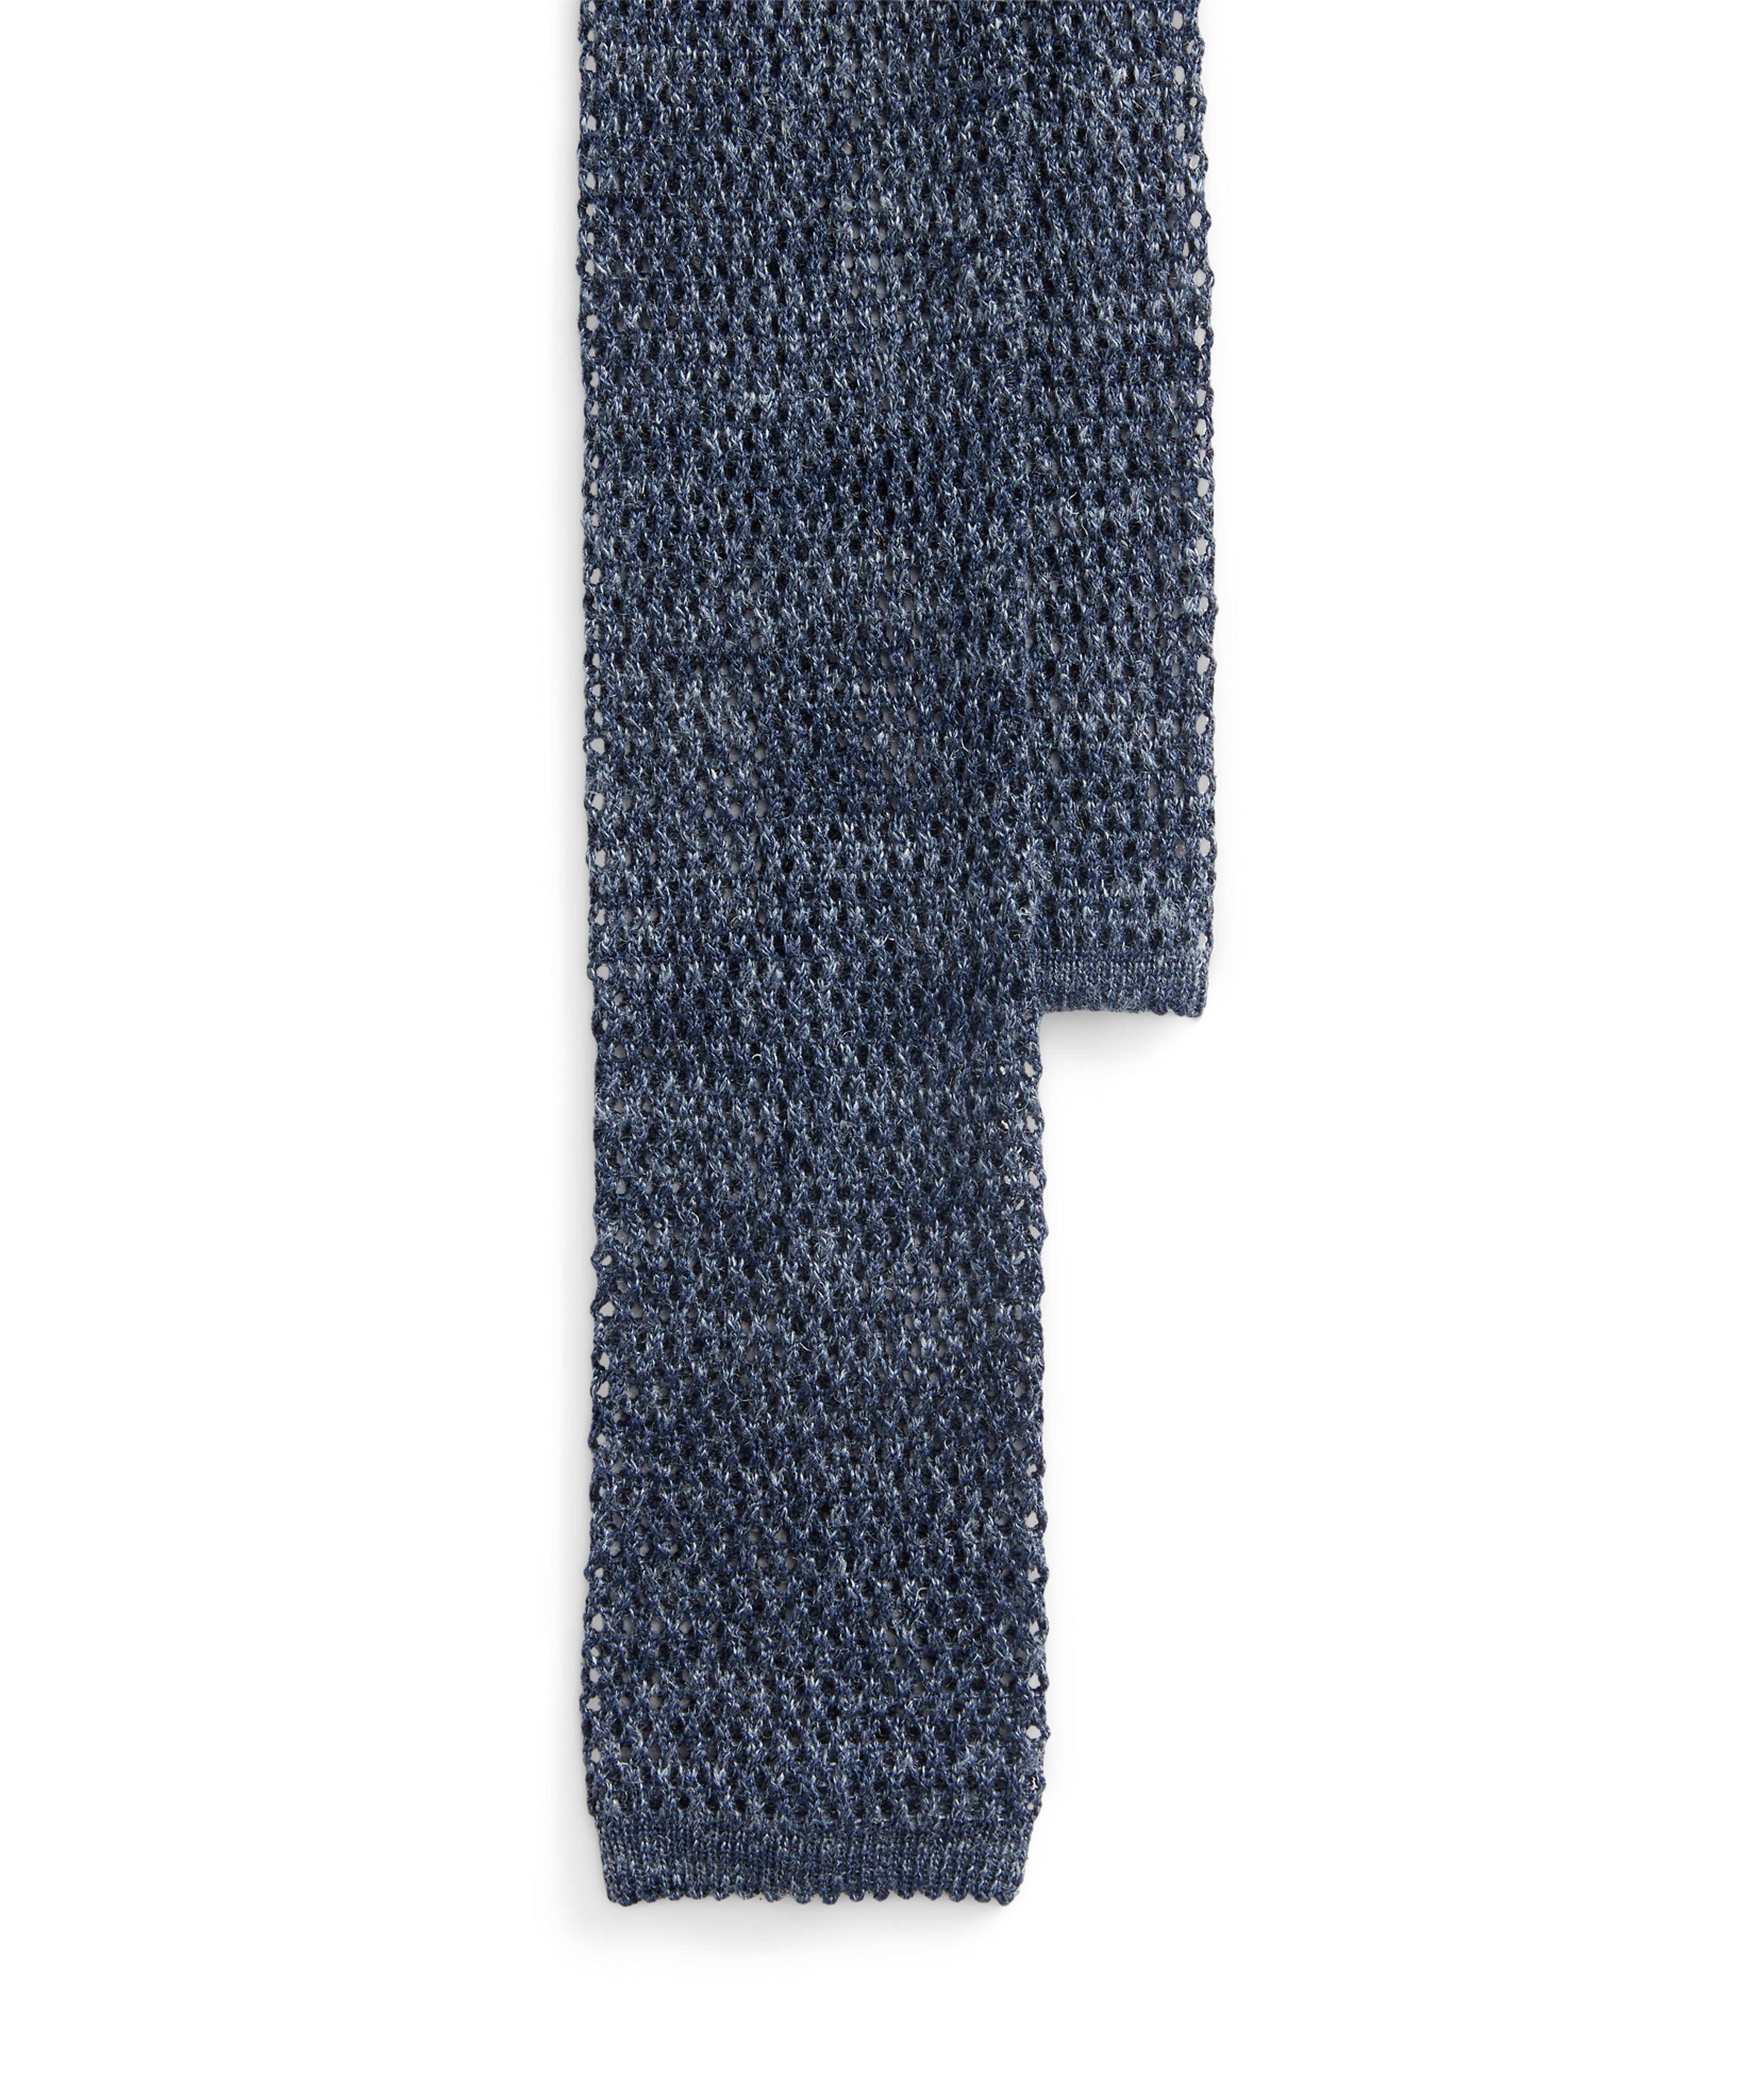 Knitted Silk-Blend Tie image 0